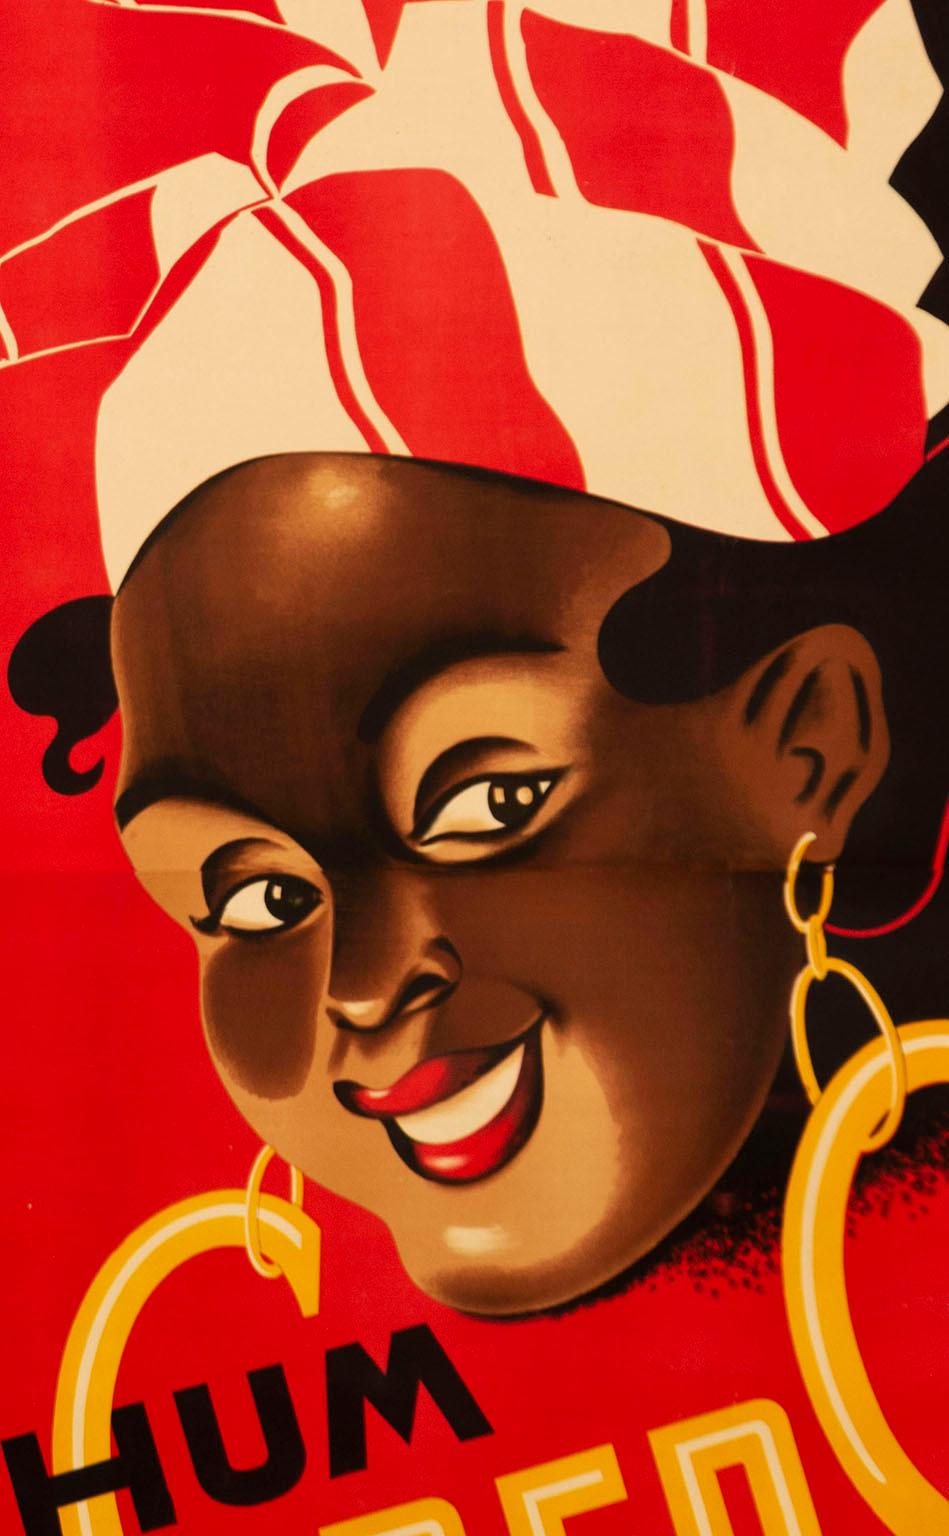 In this large-scale 1930s vintage poster for Credo Rhum, Hella Arno depicts a smiling Creole with traditional head wrap and gold hoop earrings against a brilliant red background. Her earrings playfully dangle through the text to help form and